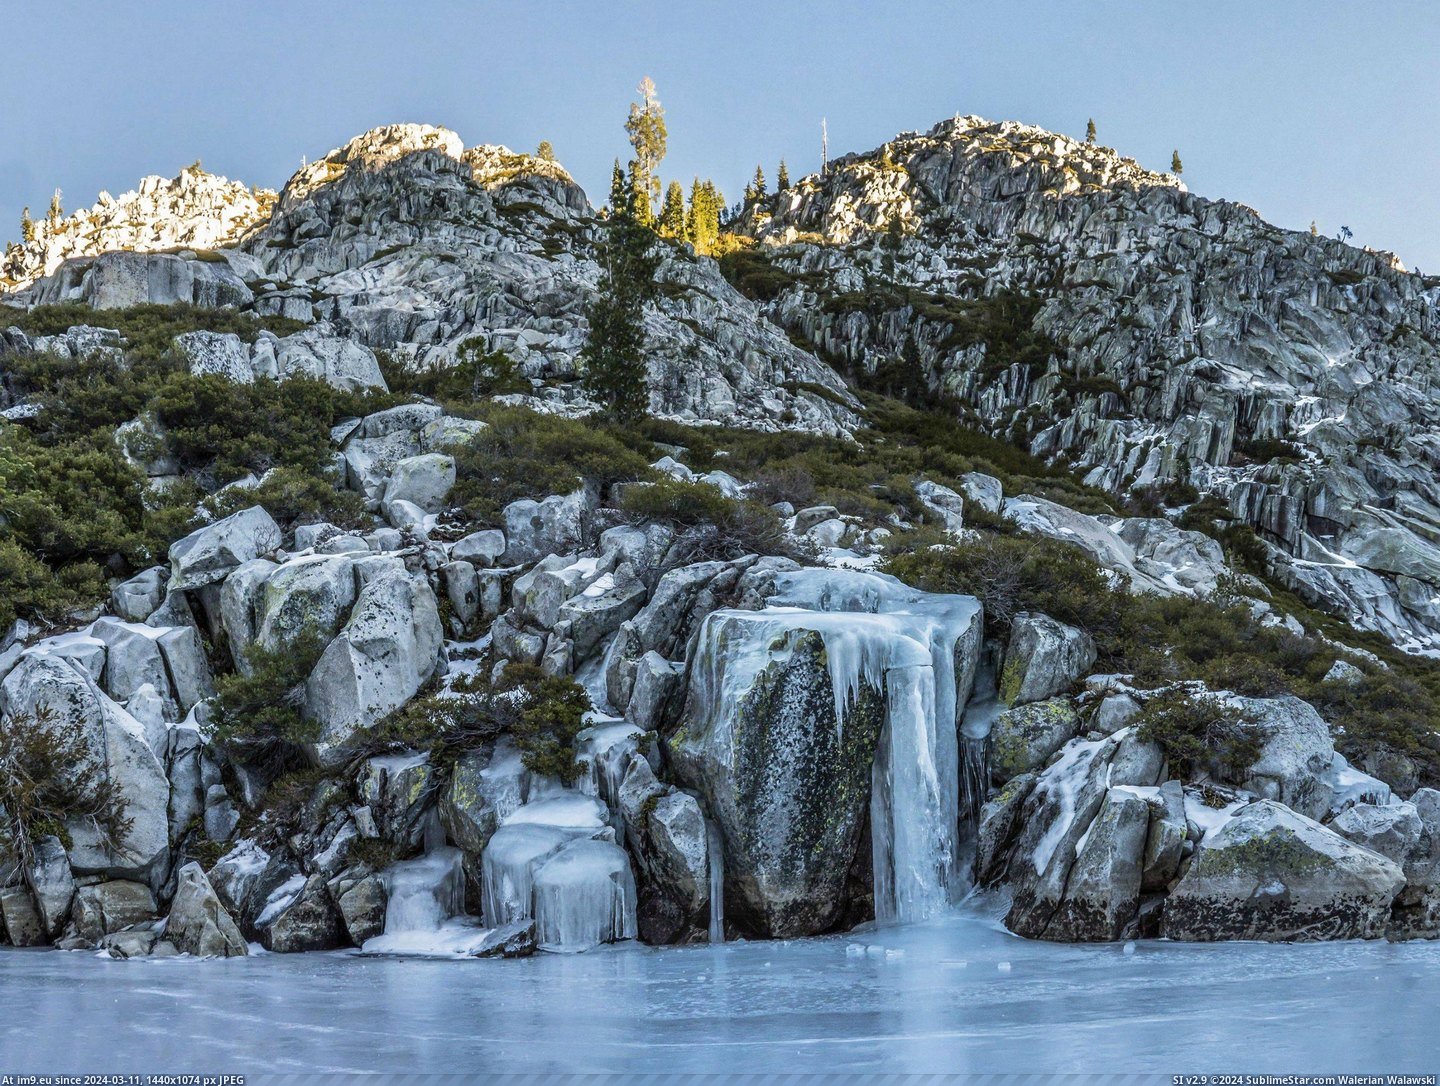 #Big #Lake #Bear #Trinity #Shore #Wilderness #2700x2025 #Frozen #Waterfall #Alps [Earthporn] 'Frozen Waterfall' at the shore of Big Bear Lake in the Trinity Alps Wilderness [OC][2700x2025] Pic. (Изображение из альбом My r/EARTHPORN favs))